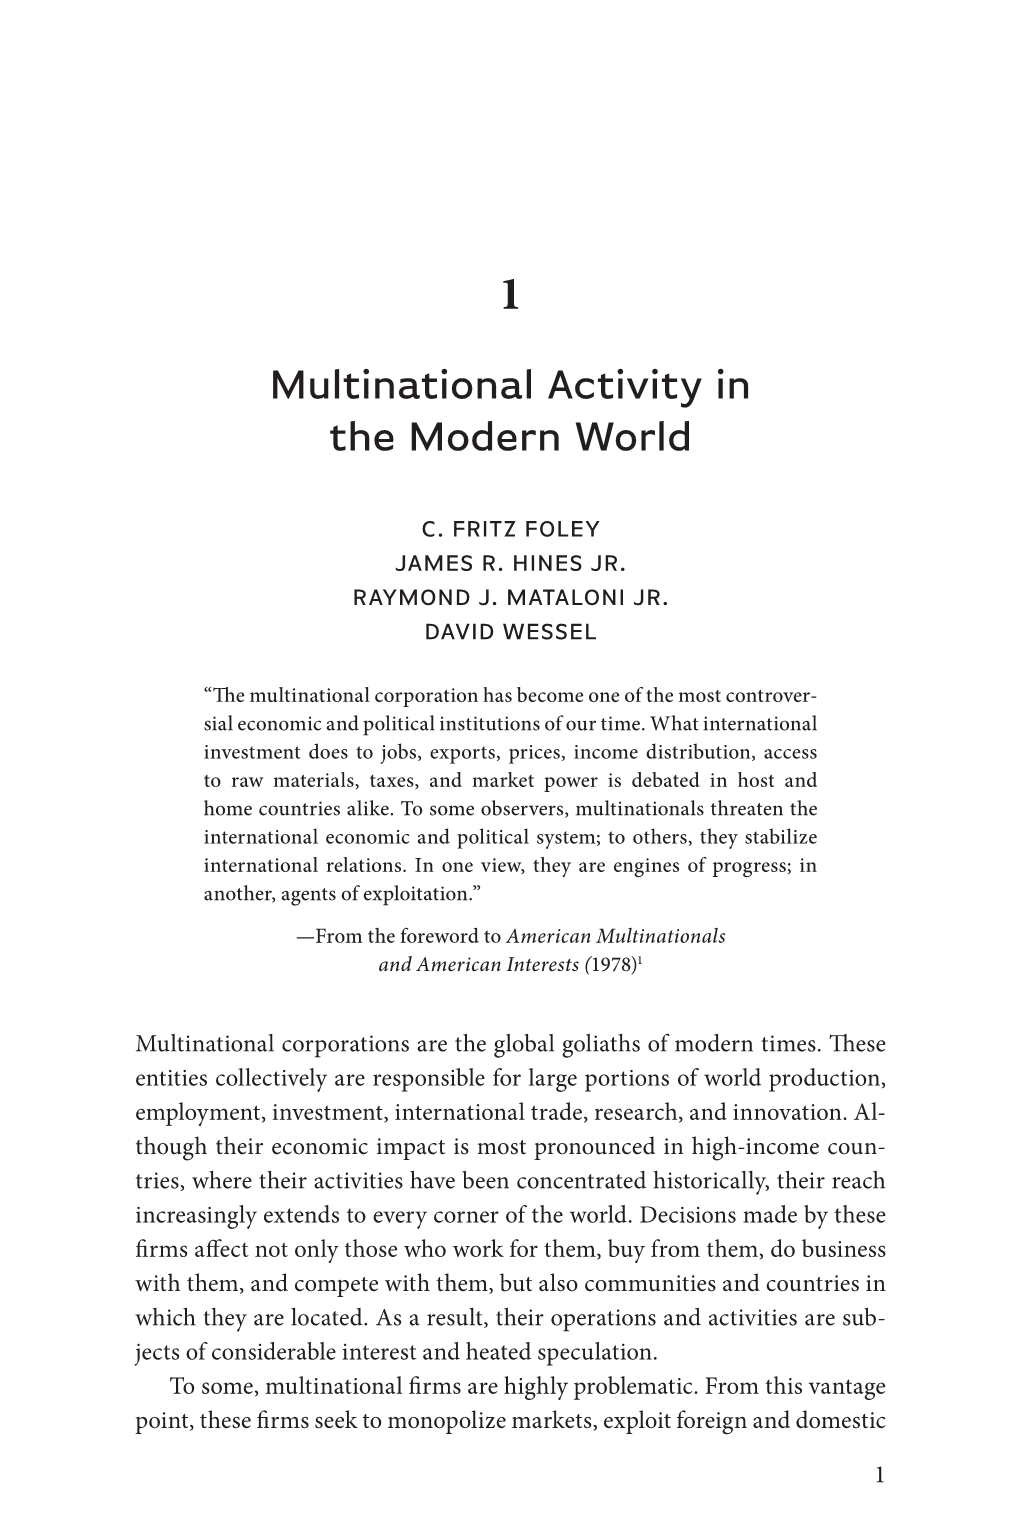 Multi National Activity in the Modern World